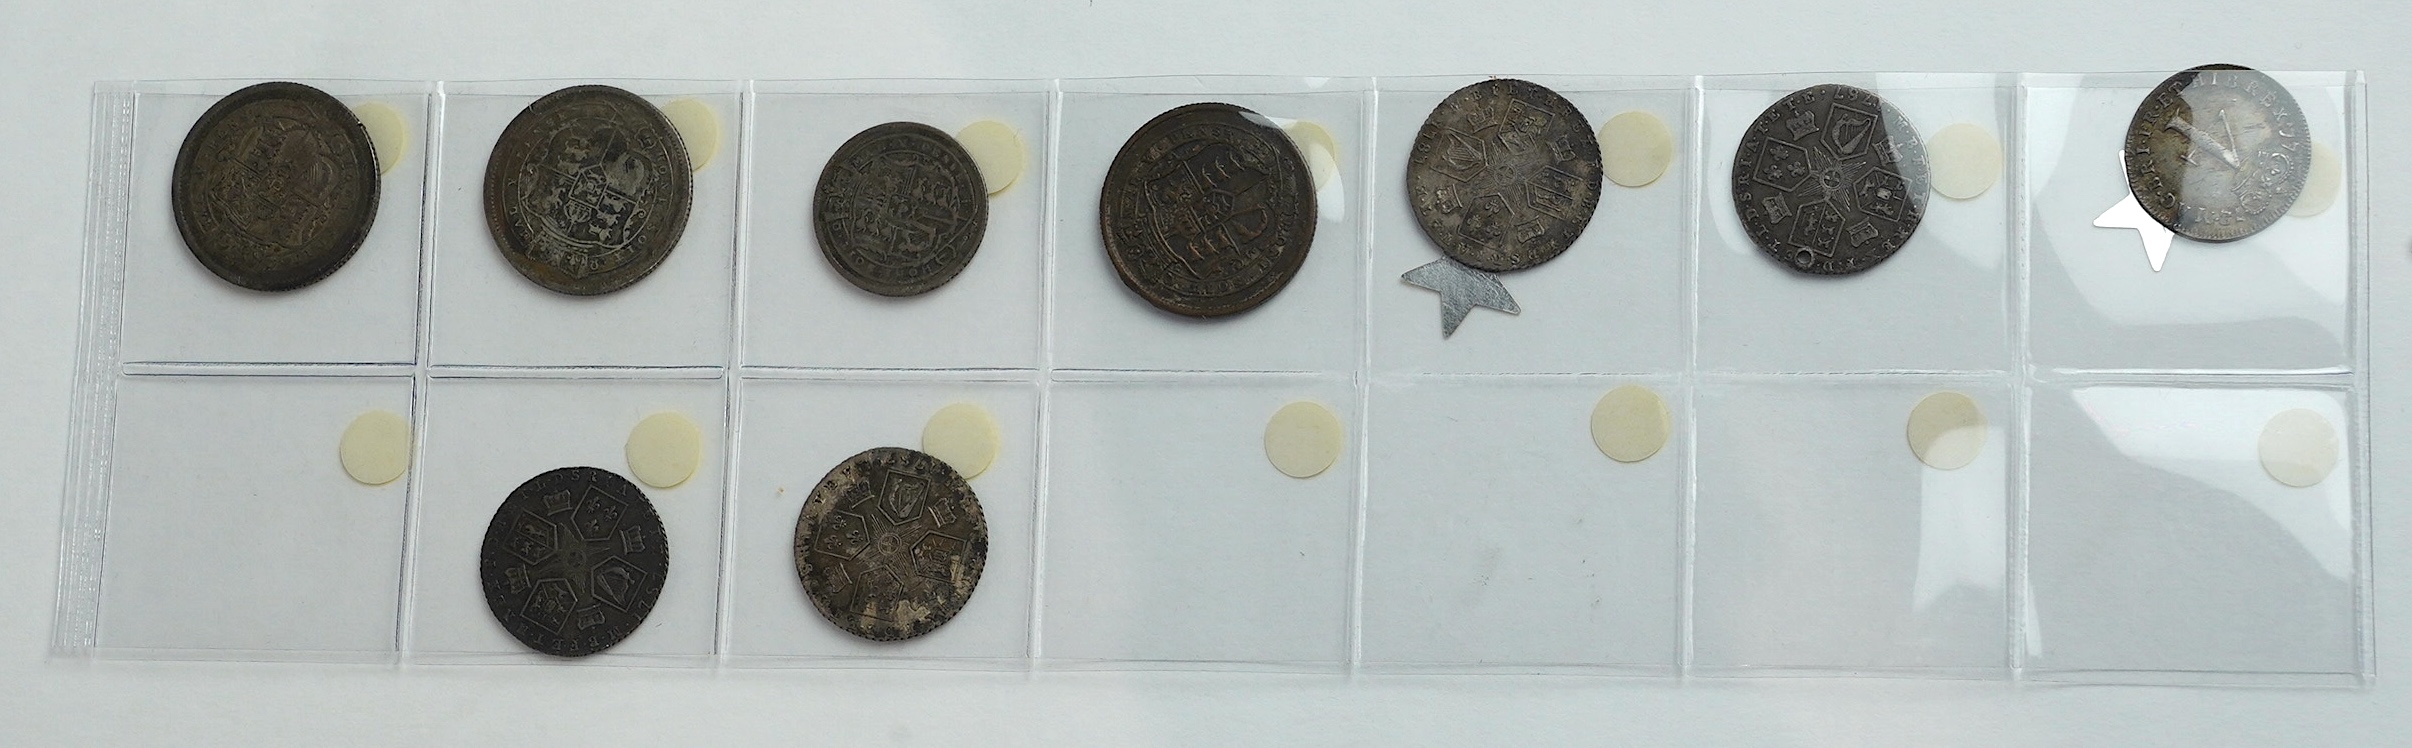 British silver coins, George III, three shilling coins, 1816, 1817, 1819, VG to VF, four 1787 sixpence coins, holed to UNC, 1818 threepence, VG and 1772 fourpence, good VF